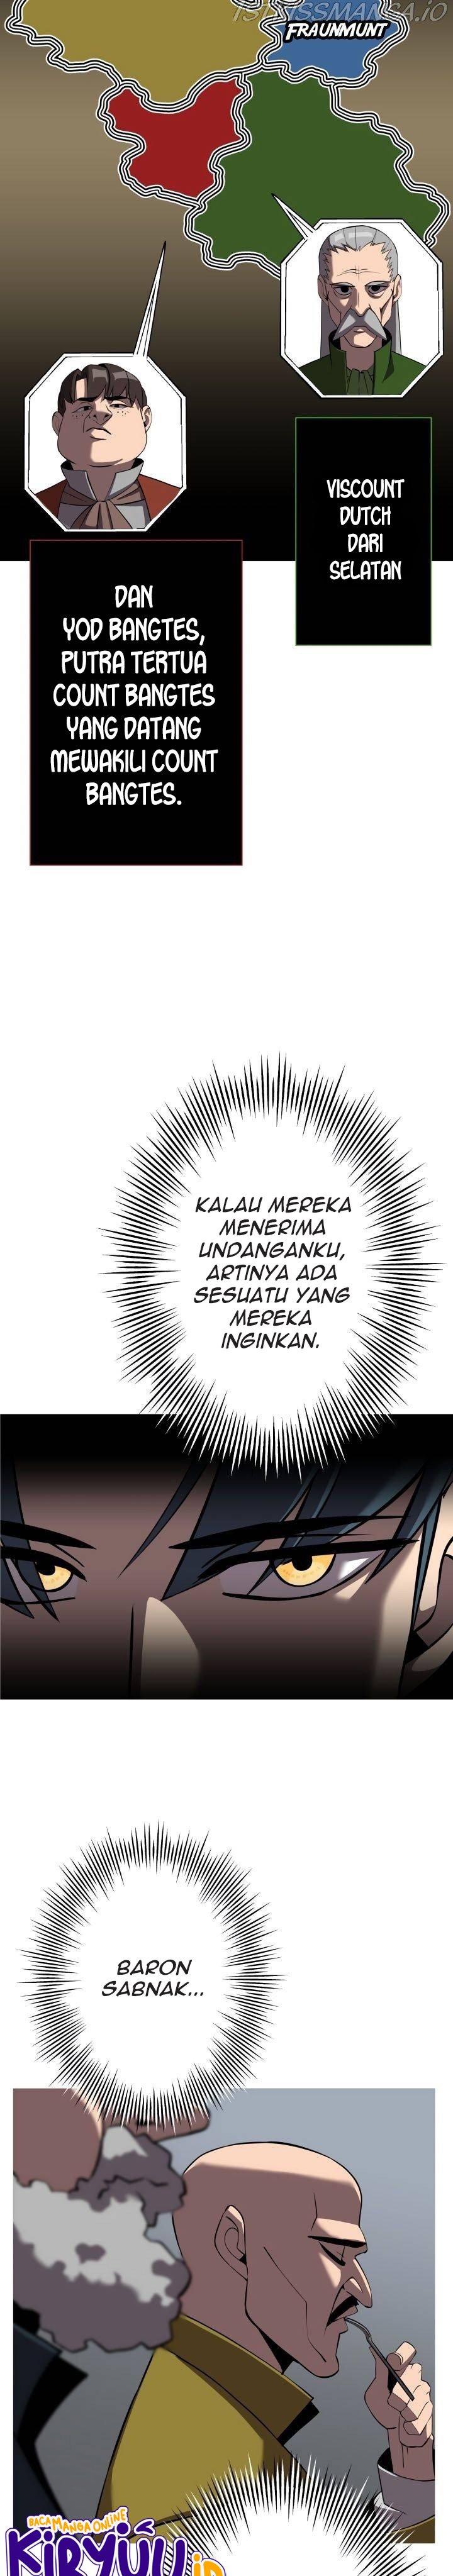 Dilarang COPAS - situs resmi www.mangacanblog.com - Komik the story of a low rank soldier becoming a monarch 061 - chapter 61 62 Indonesia the story of a low rank soldier becoming a monarch 061 - chapter 61 Terbaru 23|Baca Manga Komik Indonesia|Mangacan